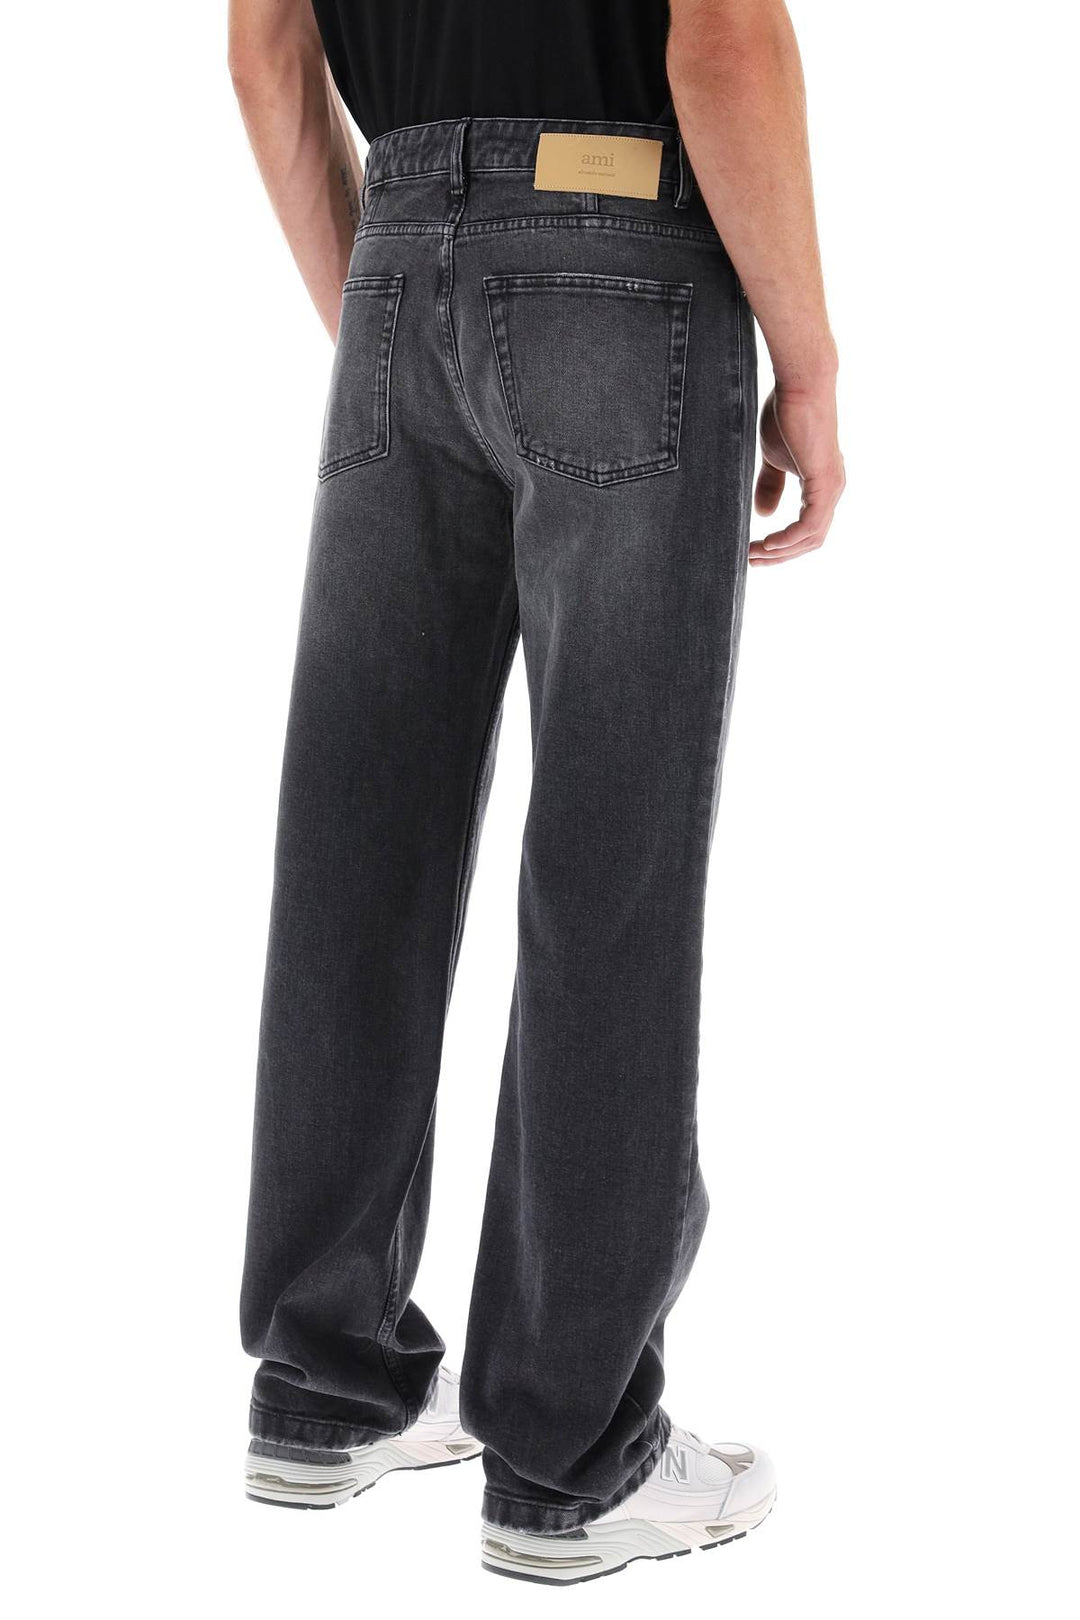 Ami Alexandre Matiussi Loose Jeans With Straight Cut   Grigio